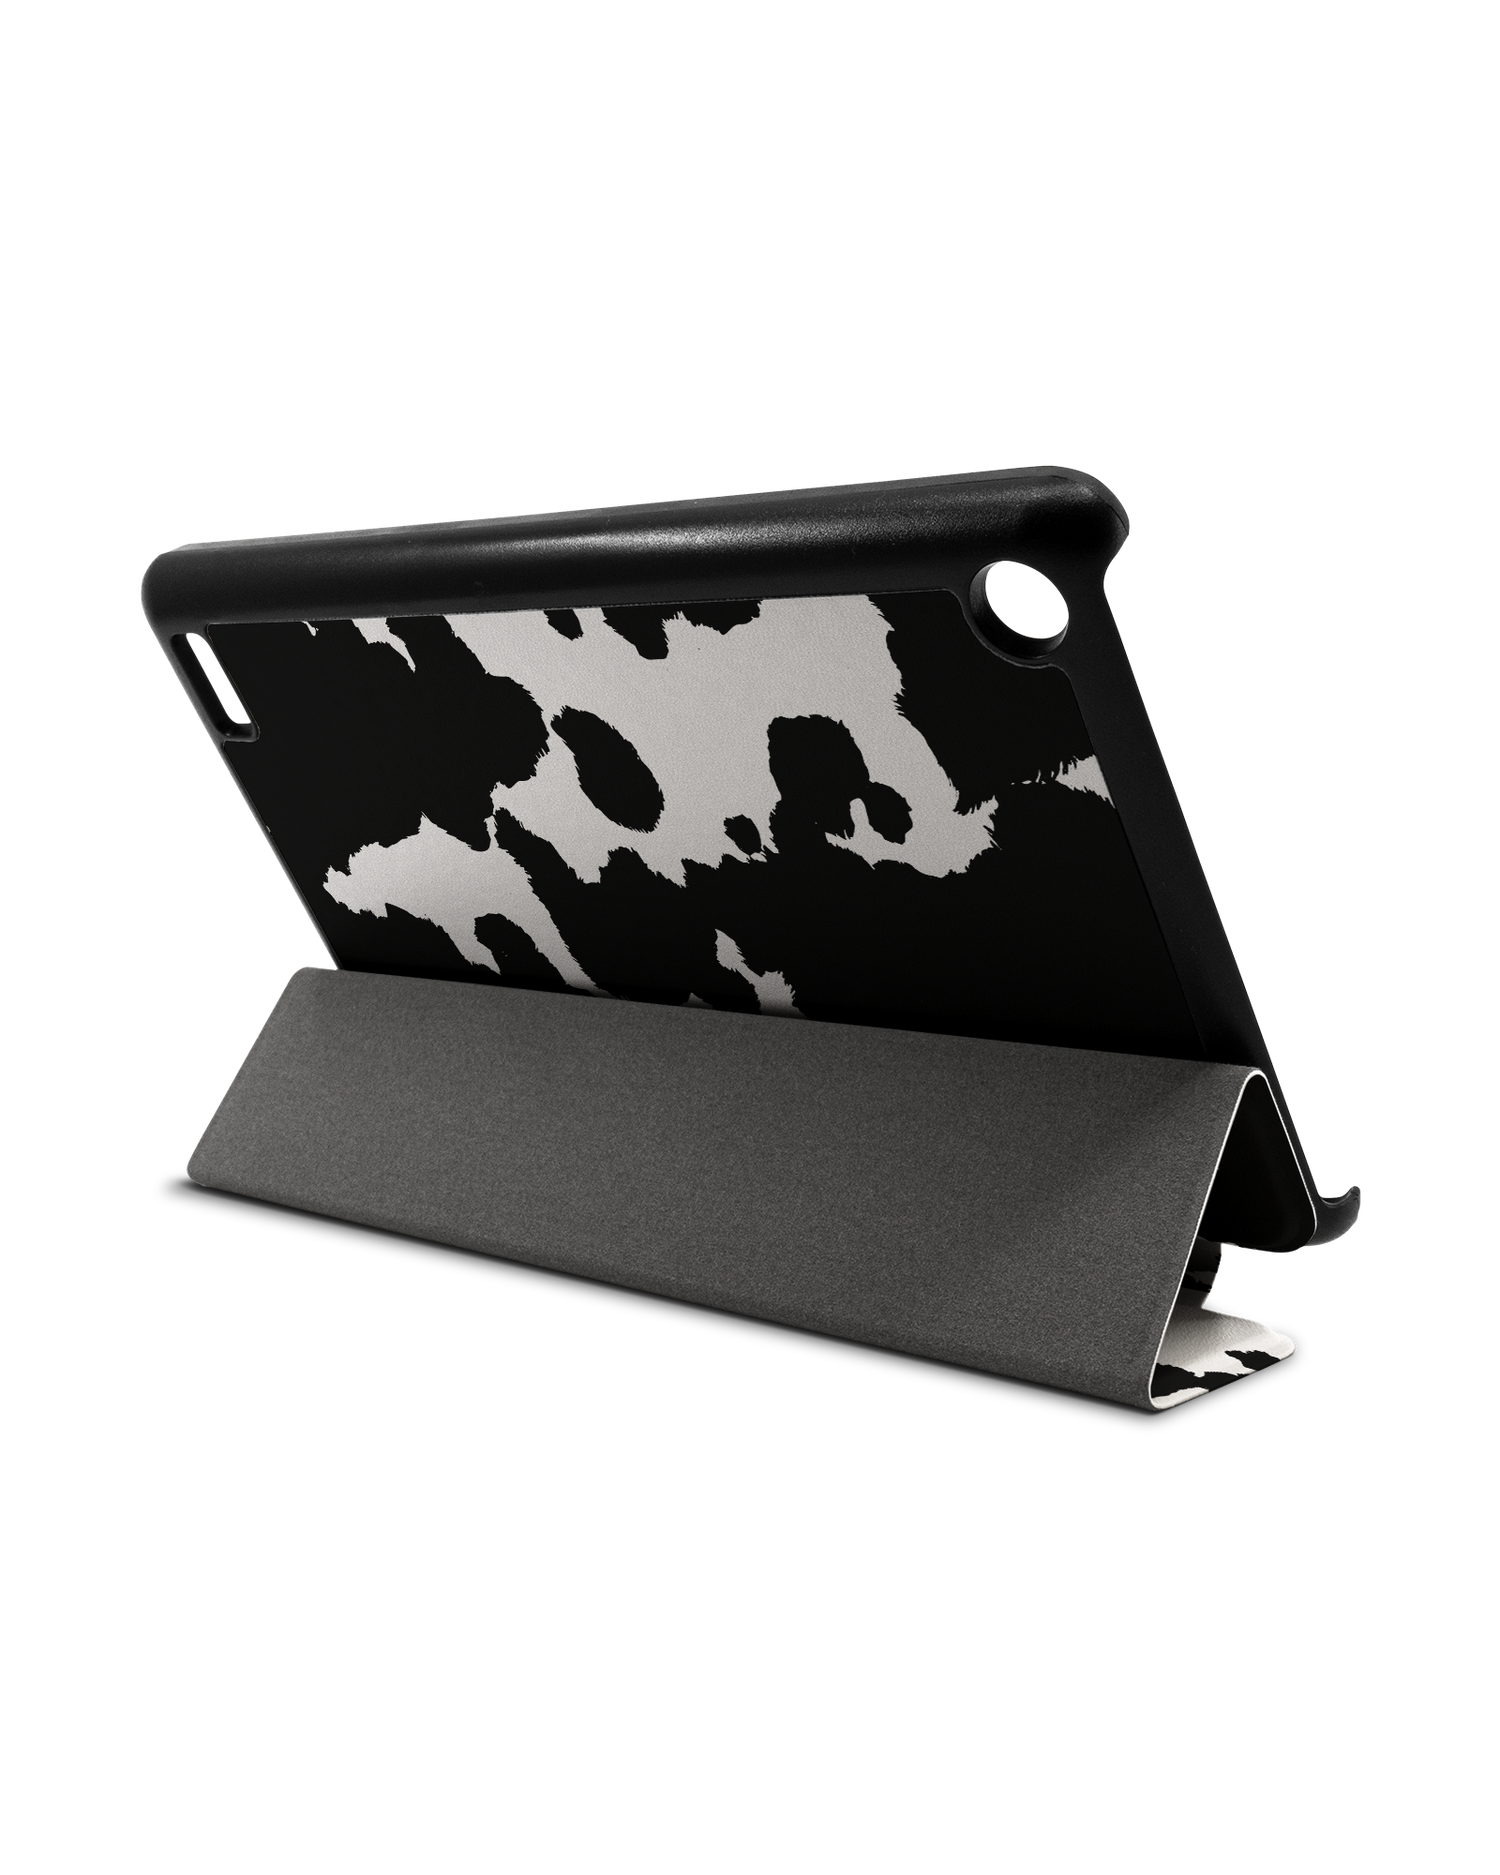 Cow Print Tablet Smart Case for Amazon Fire 7: Used as Stand